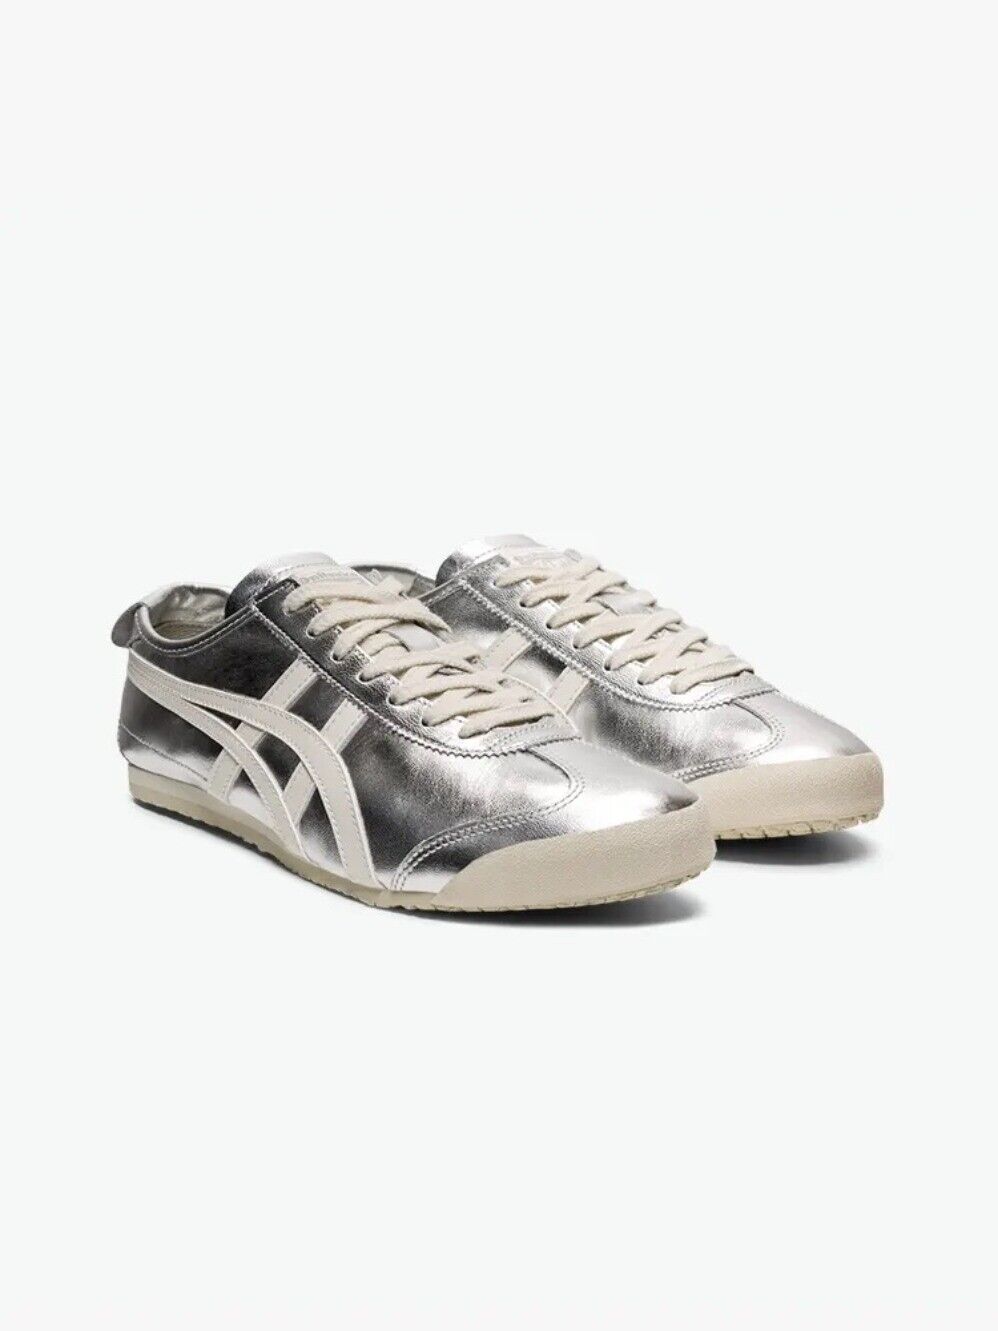 Onitsuka Tiger MEXICO 66 Sneakers Silver/Off White THL7C2-9399 Shoes Unisex 2024